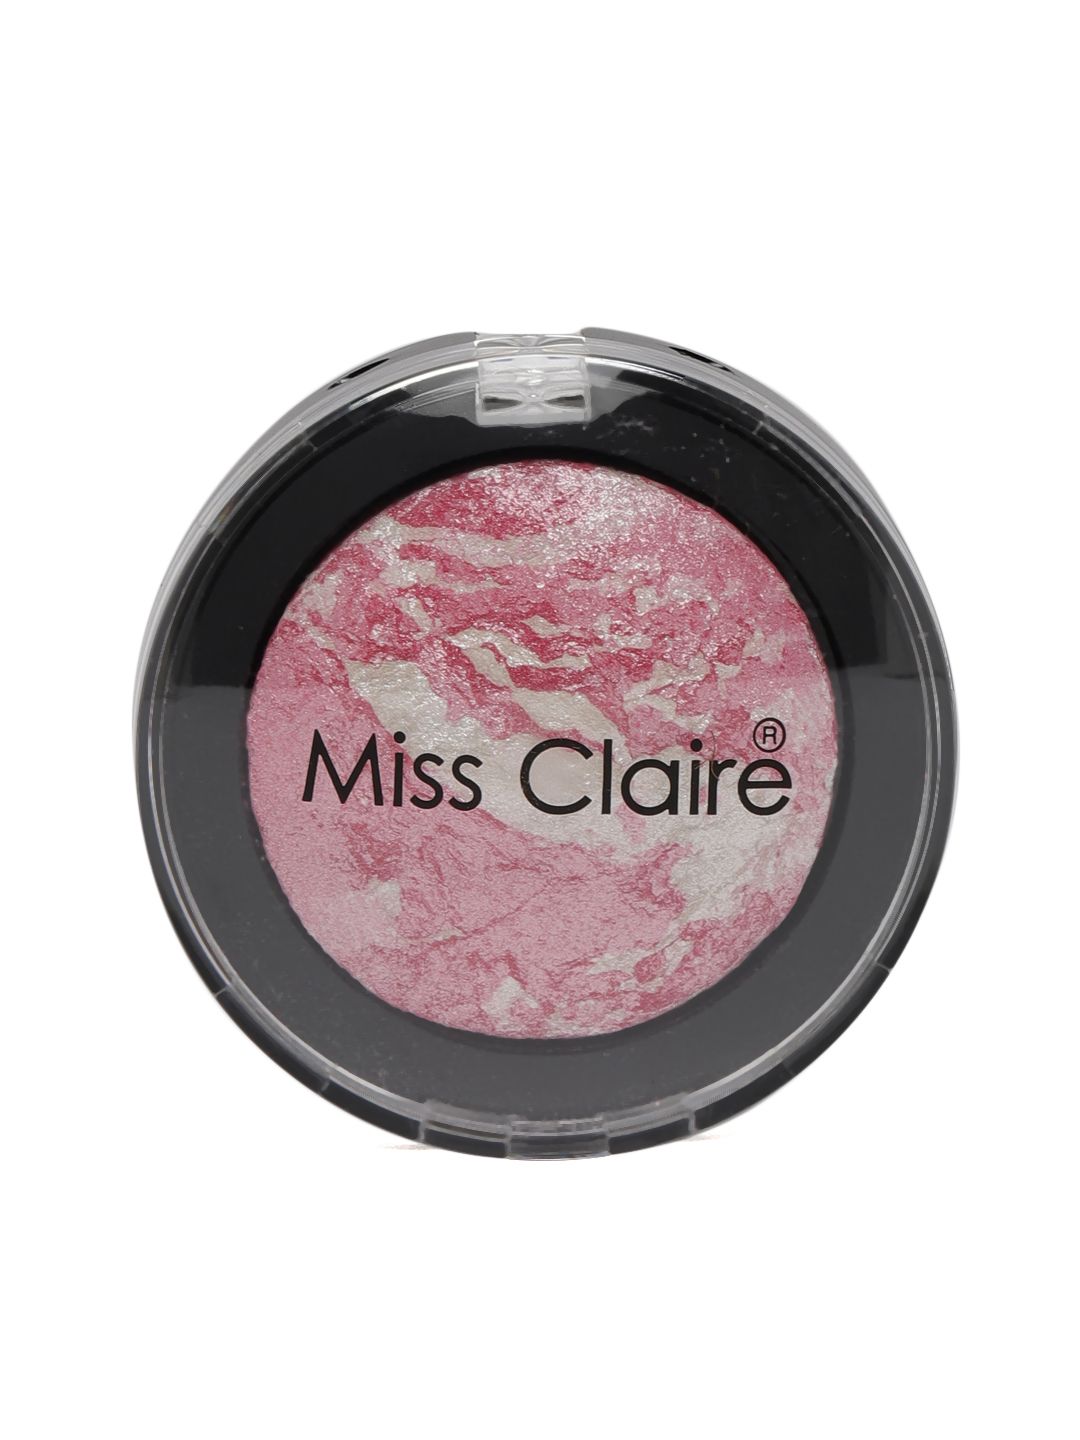 Miss Claire 05 Baked Duo Eyeshadow 3.5 g Price in India